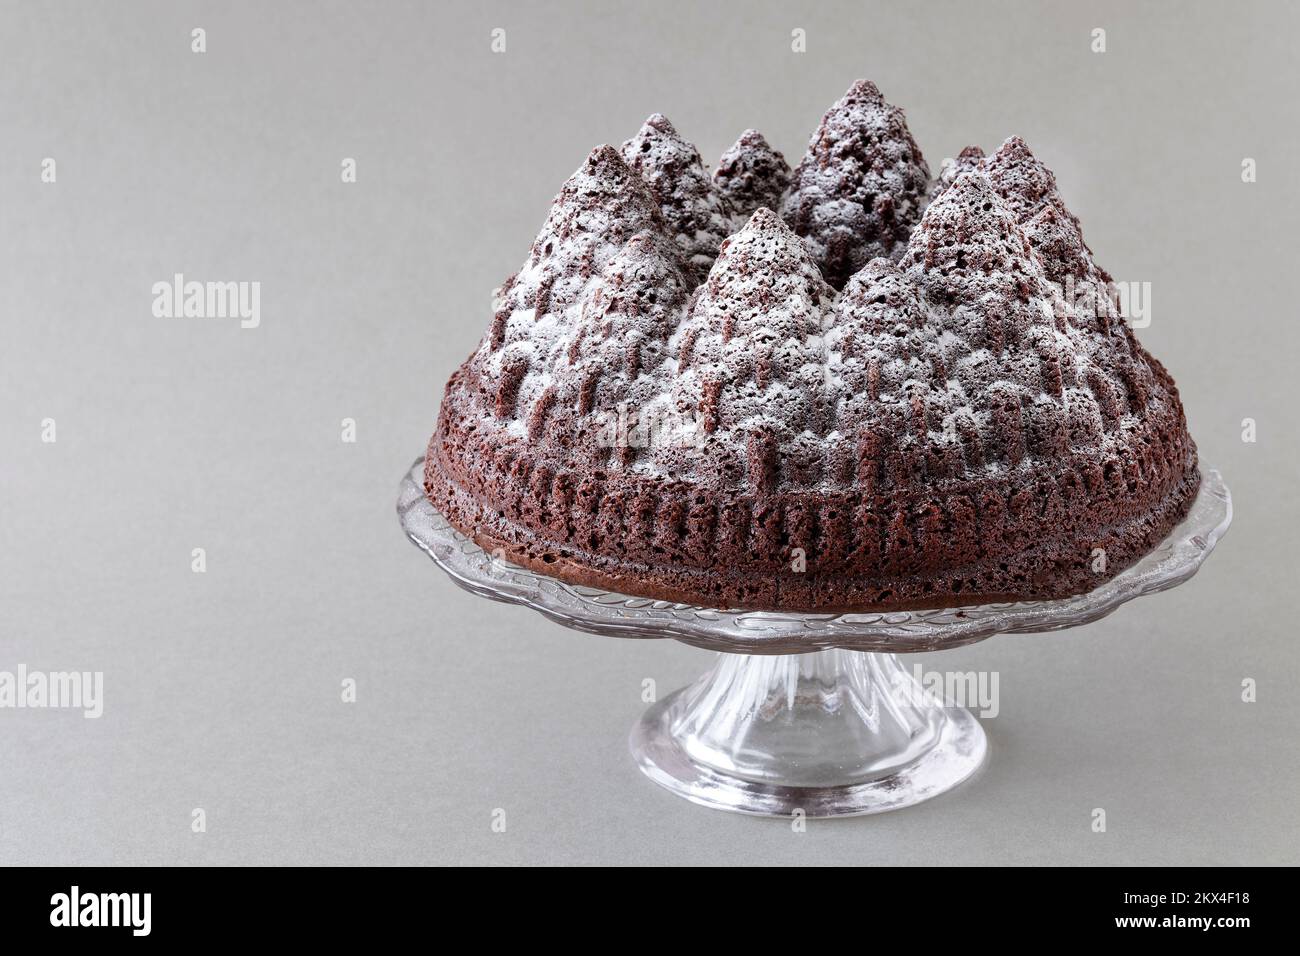 A festive christmas chocolate cake. The cake is made using a Bundt tin to form the cake batter into the tree shapes. A sprinkle of icing sugar tops it. Stock Photo